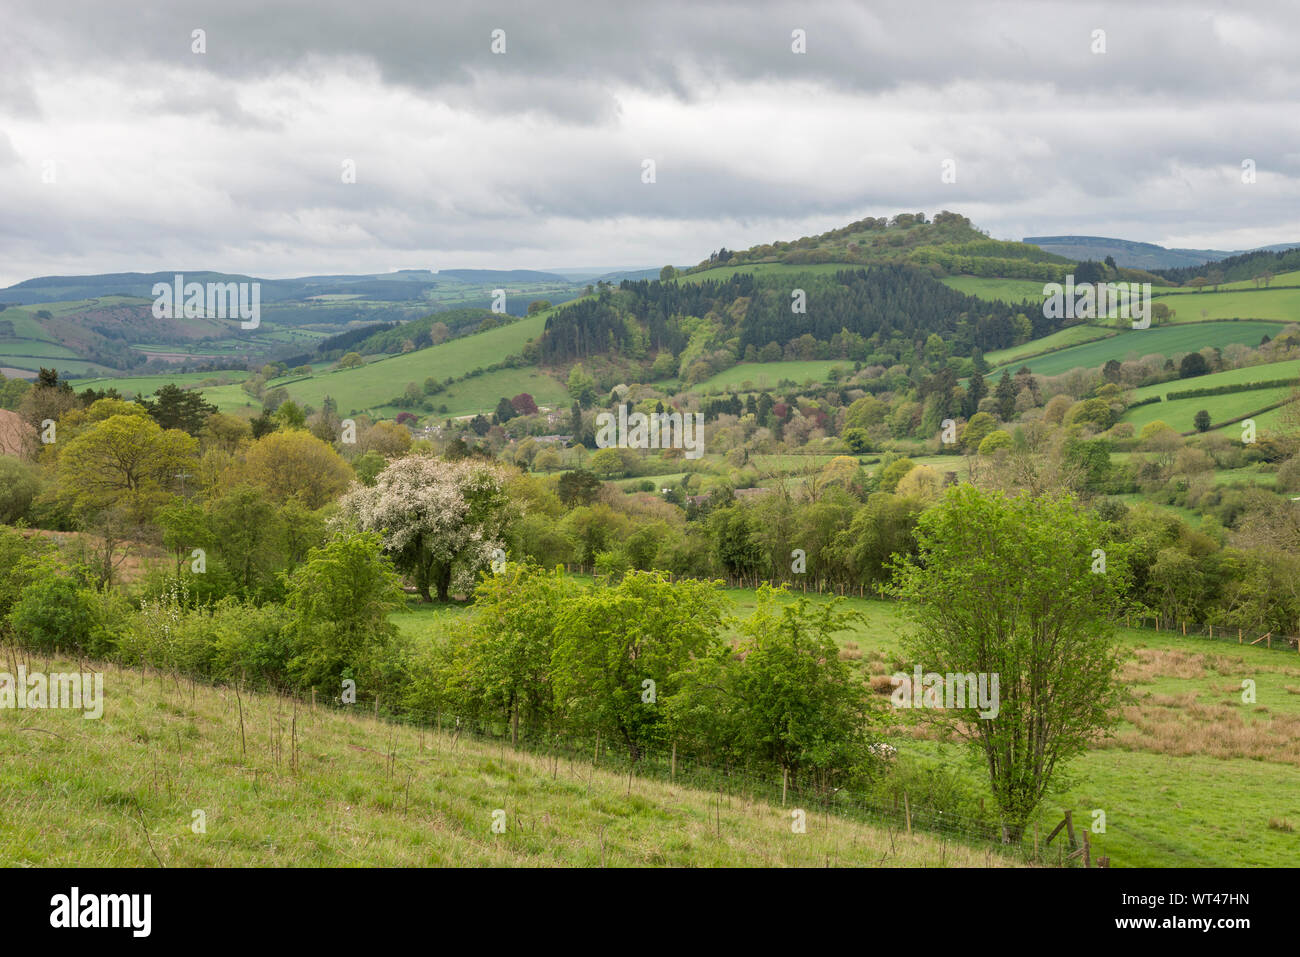 Spring day at Hopesay hill near Craven Arms in the SHropshire hills, England. Stock Photo